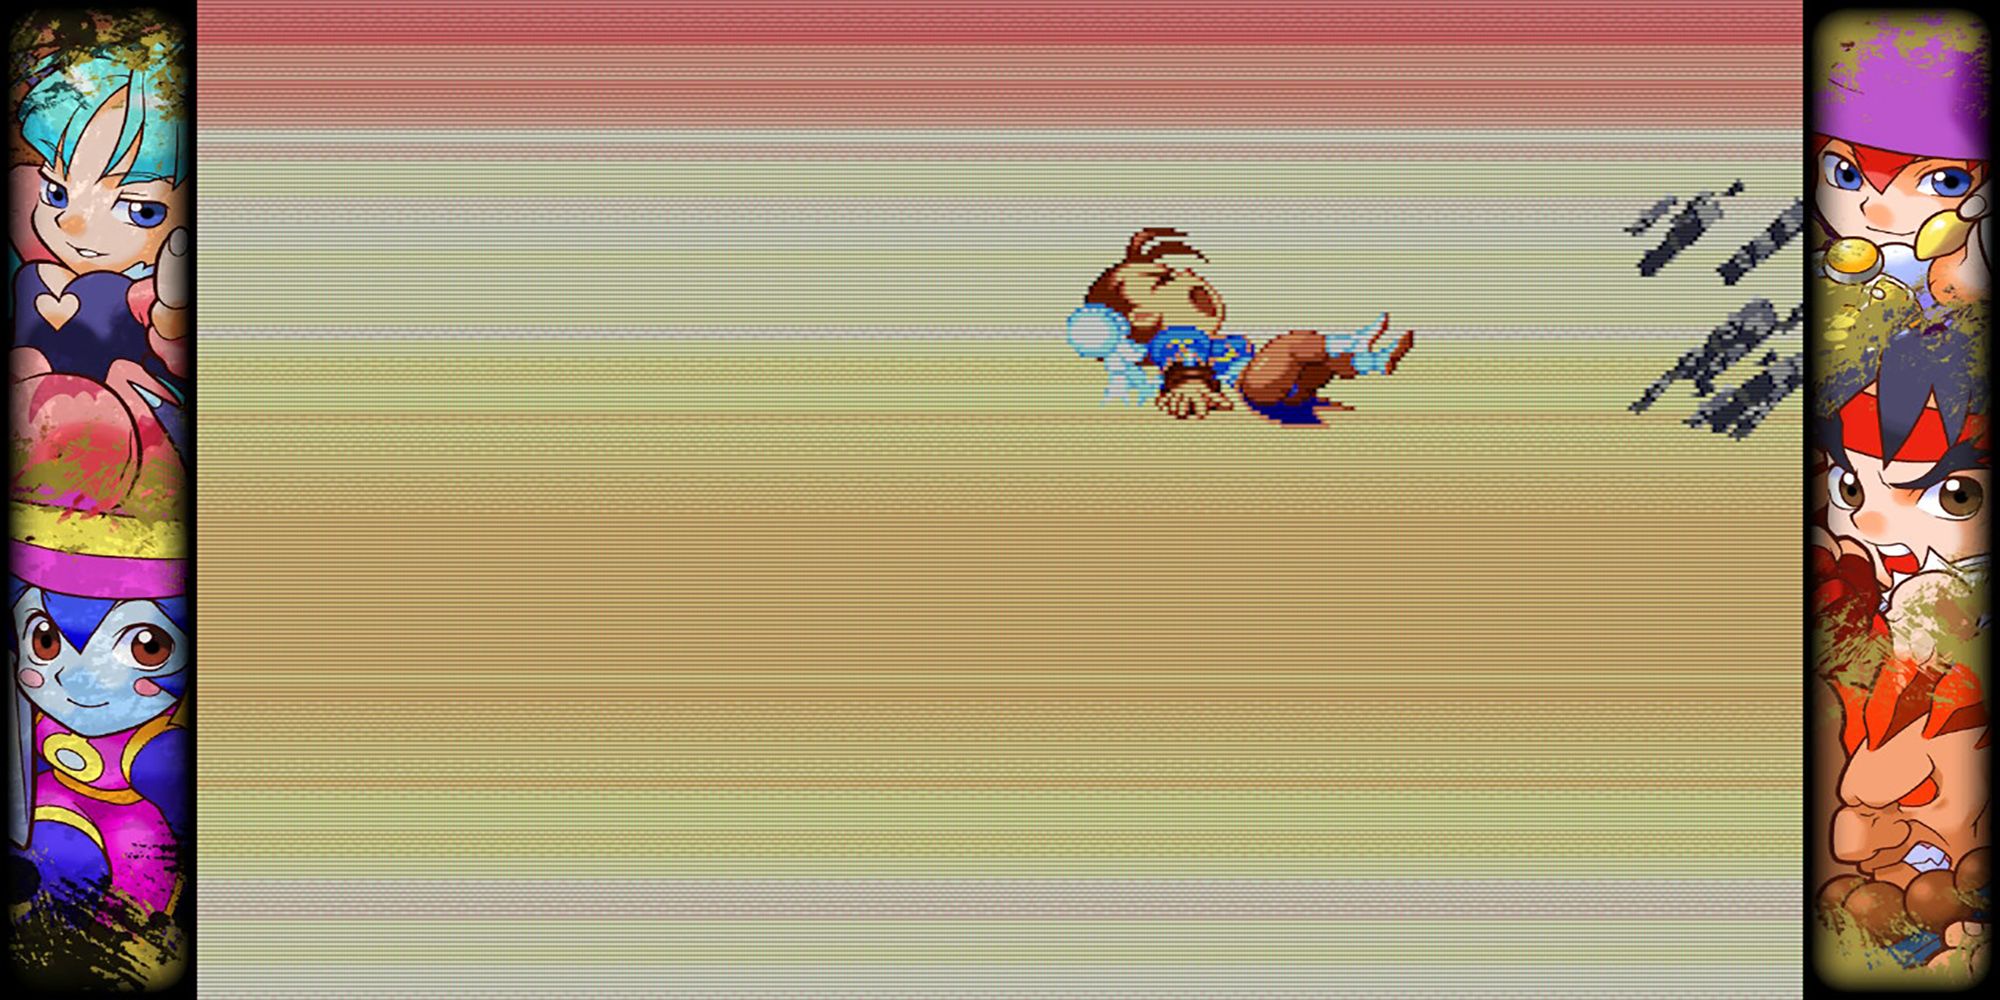 Chun-li's body smashes through a wall during an Around The World Counter in Pocket Fighter/Super Gem Fighter Mini Mix, a game in Capcom Fighting Collection.